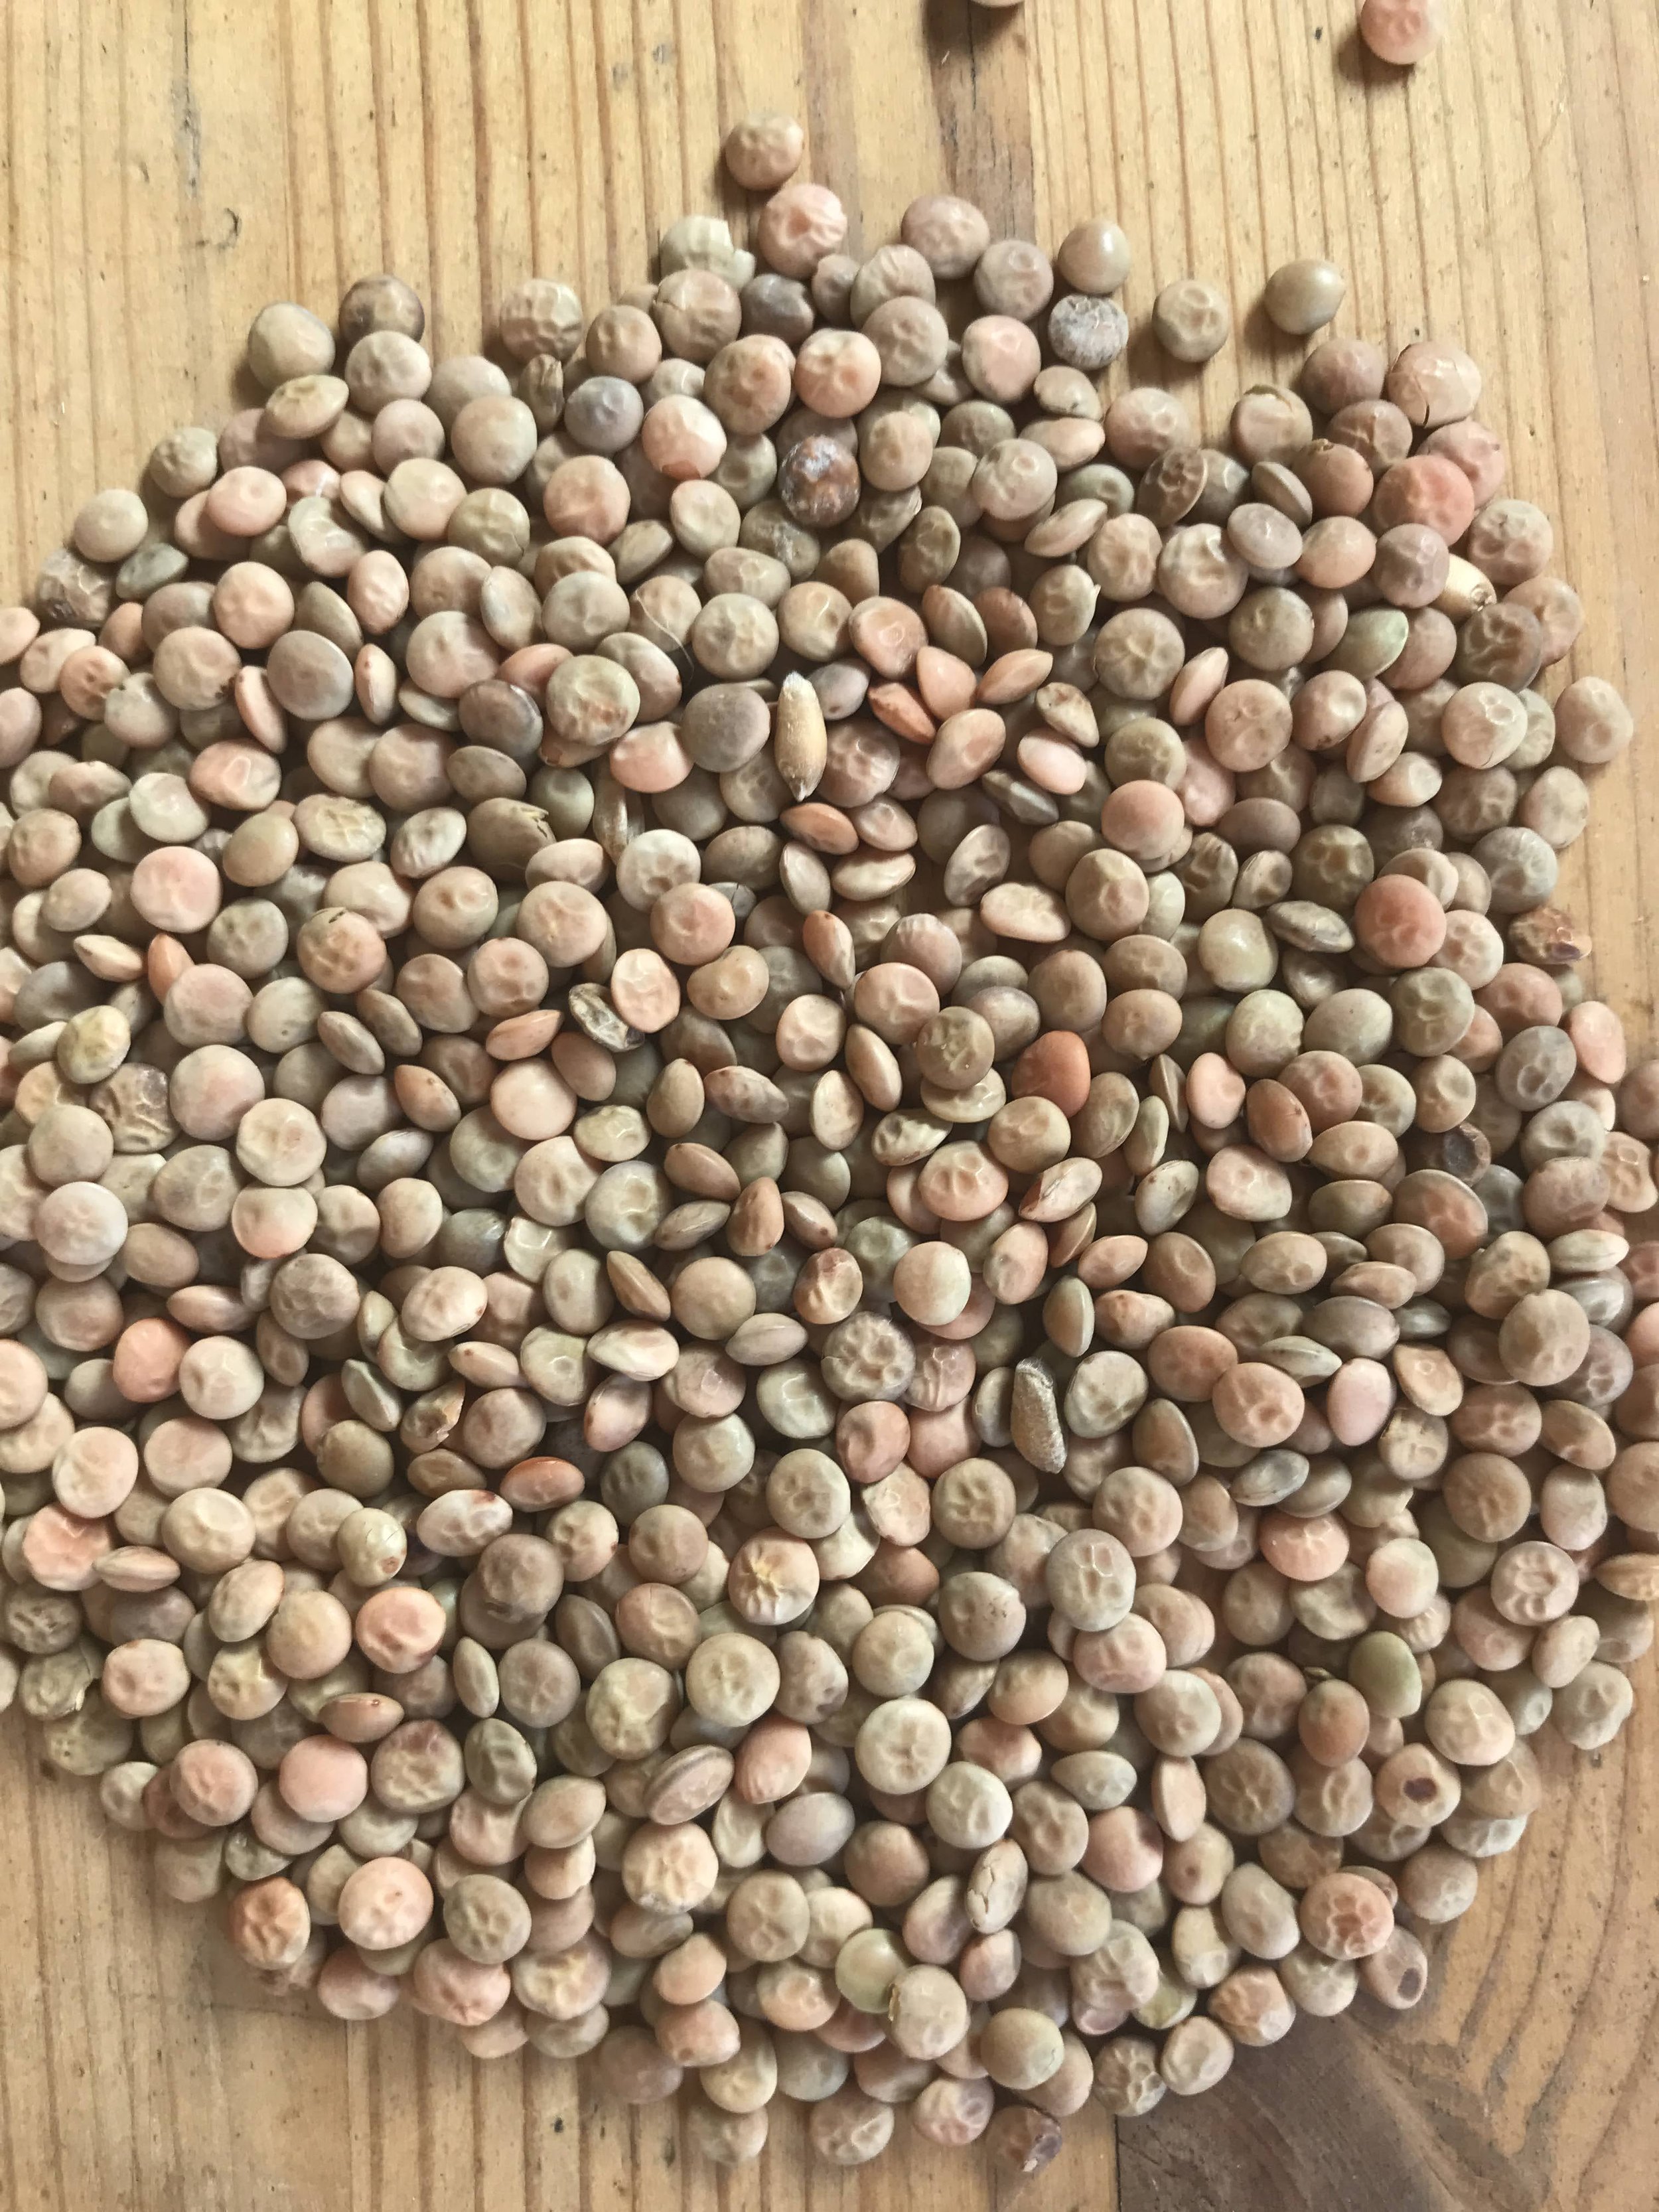 New York lentils! This exciting new crop for our region is fall-planted and harvested mid-summer, providing many soil-building benefits along the way. Creamy and earthy, these lentils land midway between a split red and green lentil.